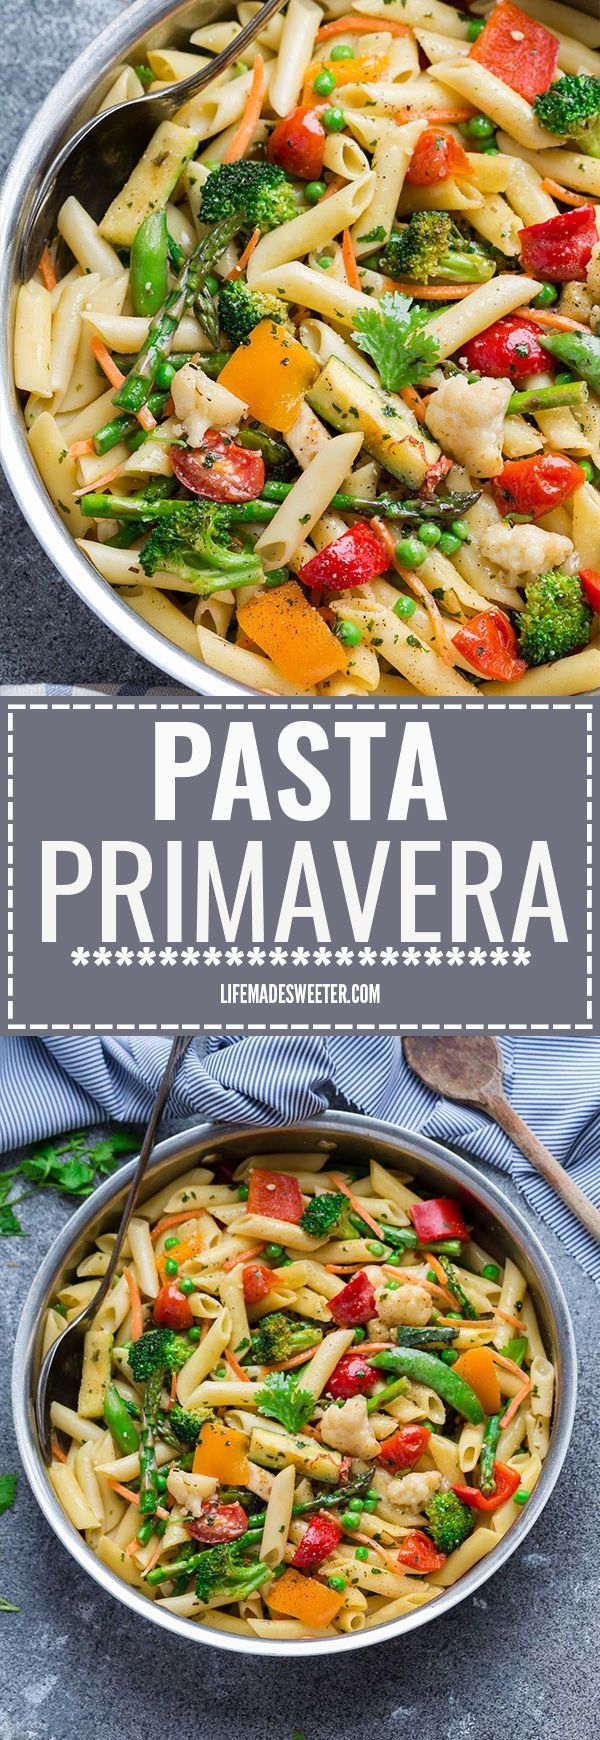 This Spring Pasta Primavera recipe comes together in under 30 minutes so it's perfect for busy weeknights. Best of all, you can serve it with or without chicken and it's chock full of fresh lemon, asparagus, snap peas, carrots and cherry tomatoes. Great for Sunday meal prep and leftovers are delicious for work or school lunchboxes or lunch bowls. -   22 veggie pasta recipes
 ideas